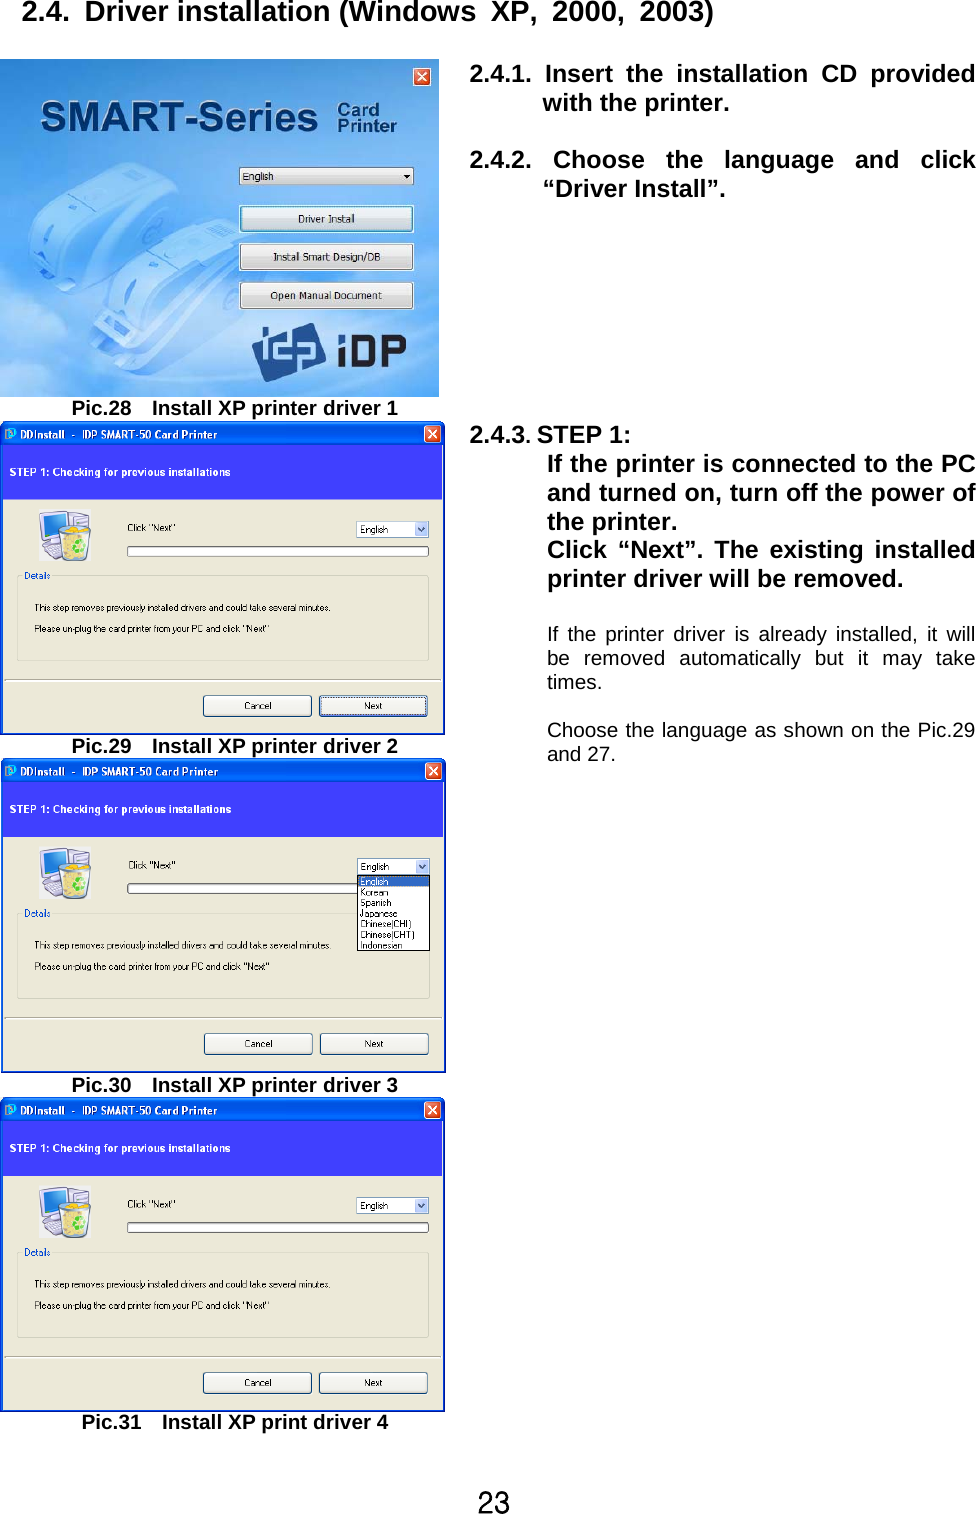 YZ2.4. Driver installation (Windows XP, 2000, 2003)Pic.28 Install XP printer driver 12.4.1. Insert the installation CD providedwith the printer.2.4.2. Choose the language and click“Driver Install”.Pic.29 Install XP printer driver 2Pic.30 Install XP printer driver 32.4.3.STEP 1:If the printer is connected to the PCand turned on, turn off the power ofthe printer.Click “Next”. The existing installedprinter driver will be removed.If the printer driver is already installed, it willbe removed automatically but it may taketimes.Choose the language as shown on the Pic.29and 27.Pic.31 Install XP print driver 4